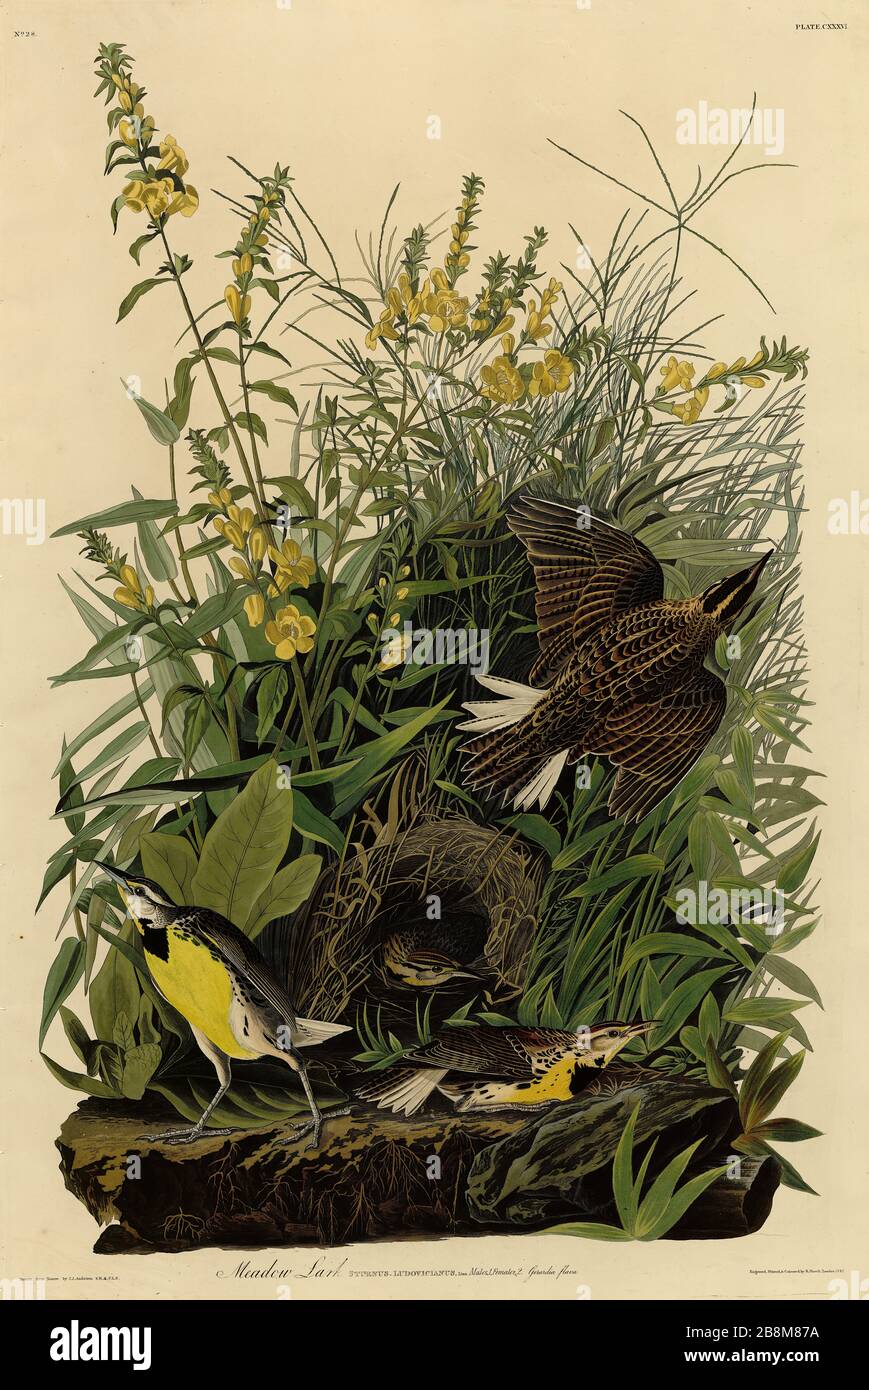 Plate 136 Meadow Lark, from The Birds of America folio (1827–1839) by John James Audubon - Very high resolution and quality edited image Stock Photo